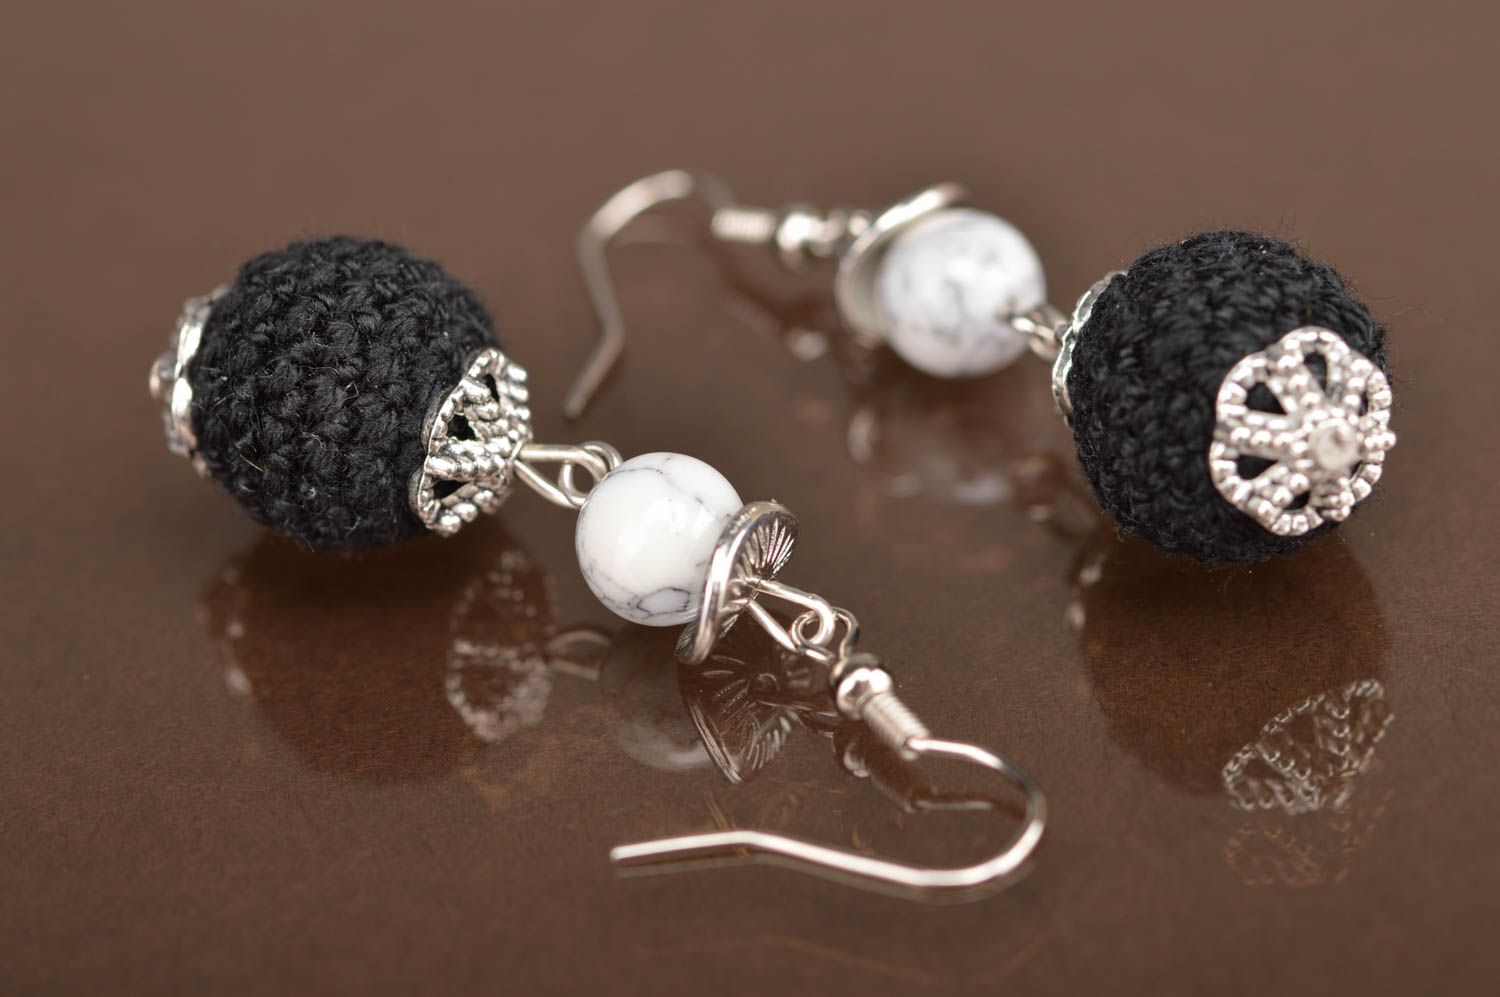 Unusual beautiful handmade earrings with crocheted over beads black and white photo 4